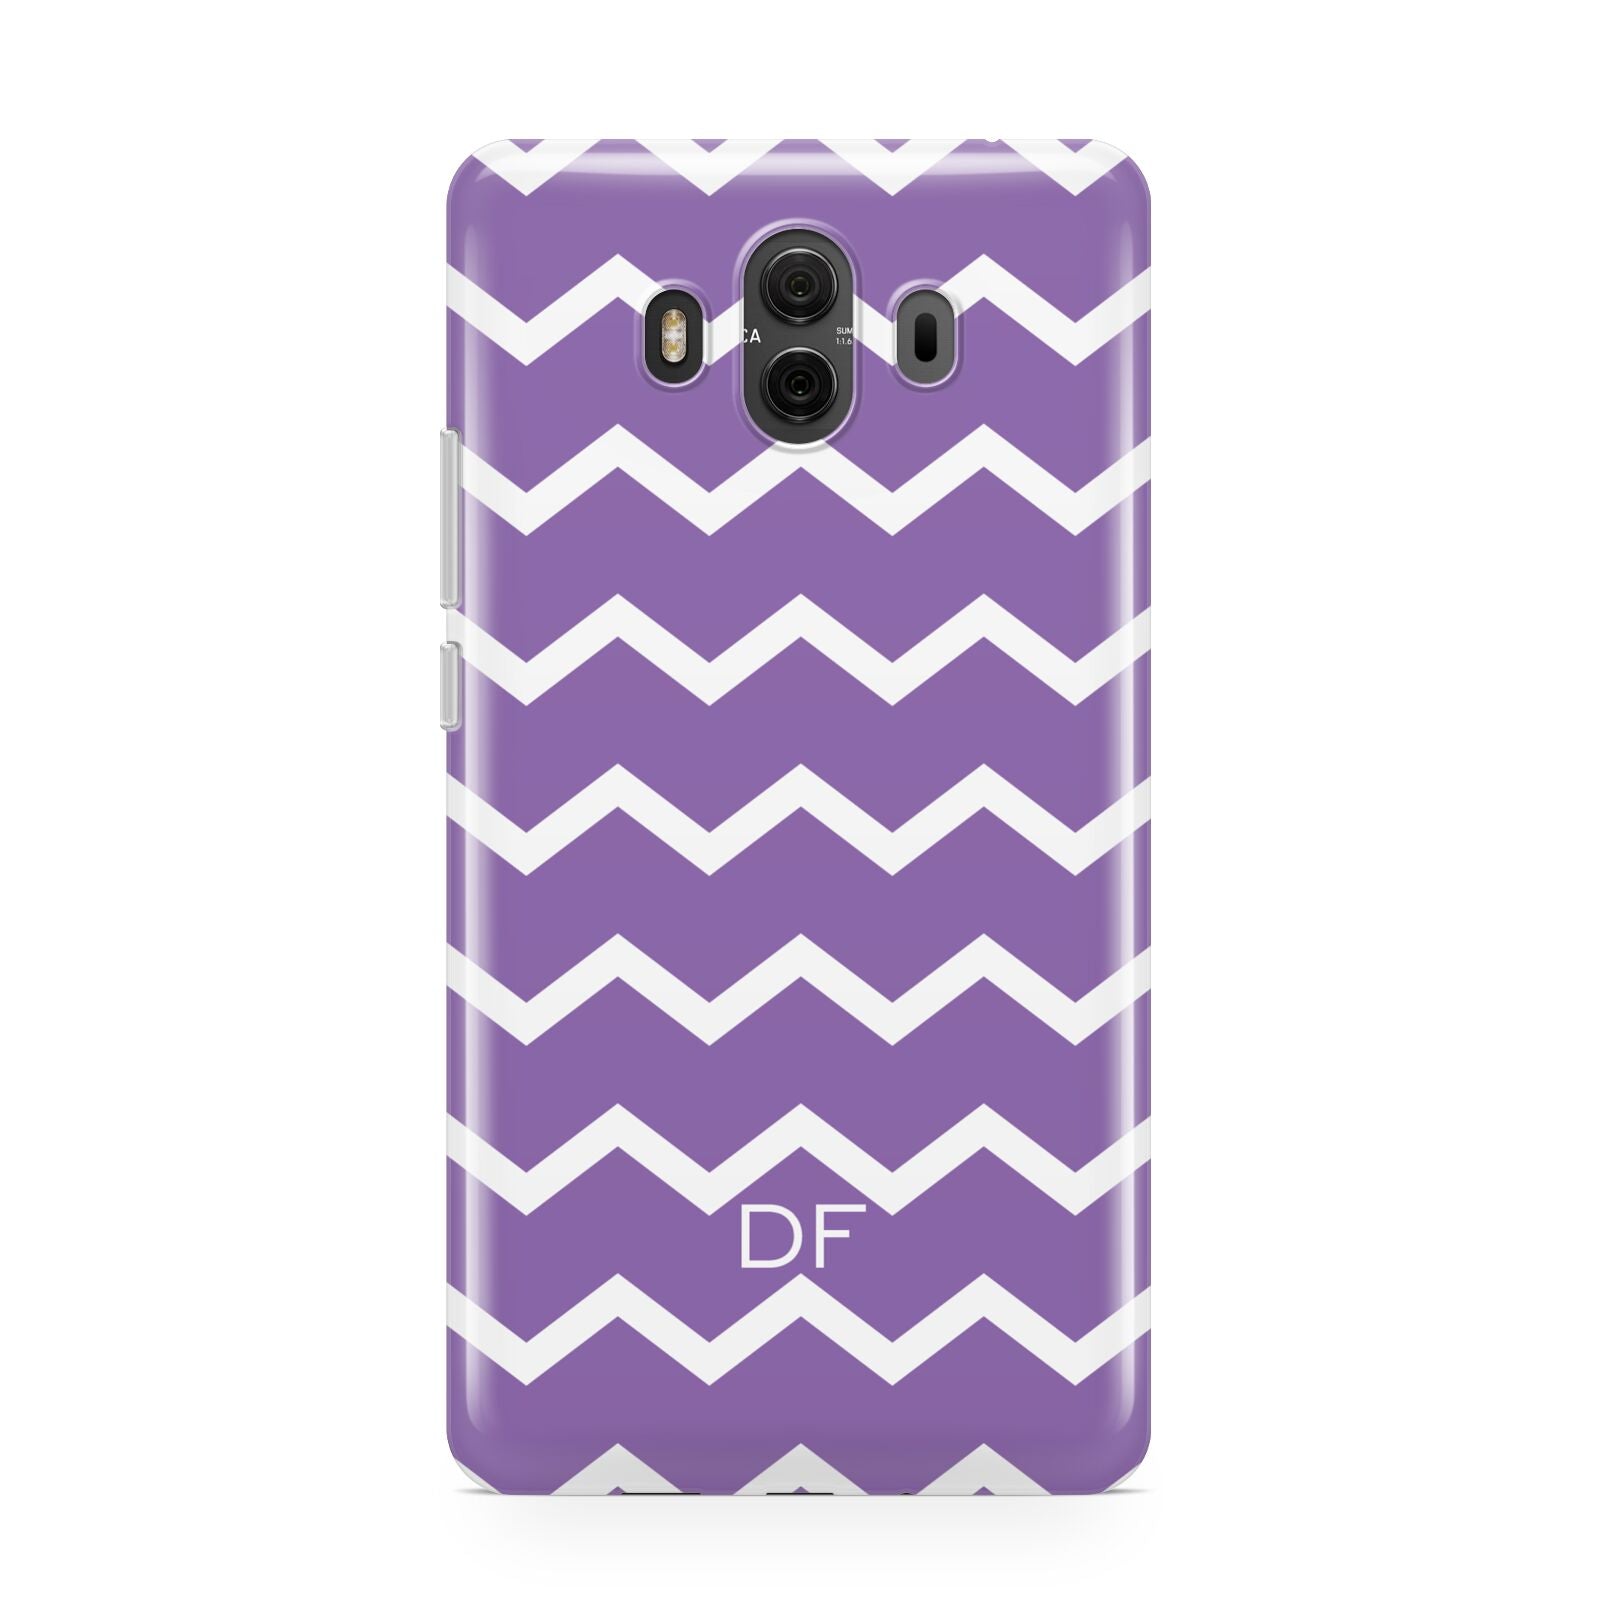 Personalised Chevron Purple Huawei Mate 10 Protective Phone Case